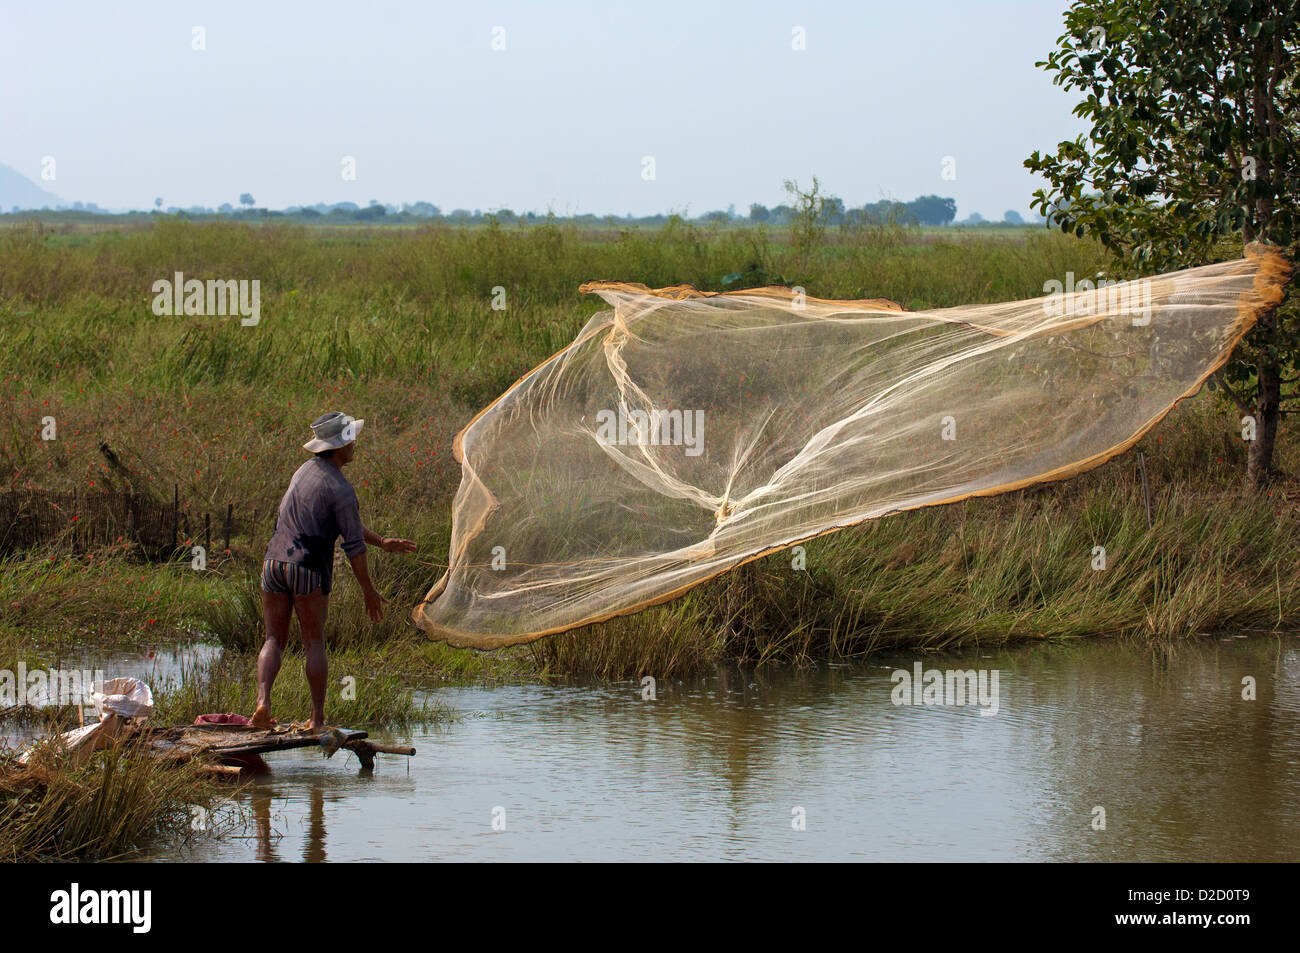 Fisherman throwing a cast net in a river, Battambang, Cambodia Stock Photo  - Alamy